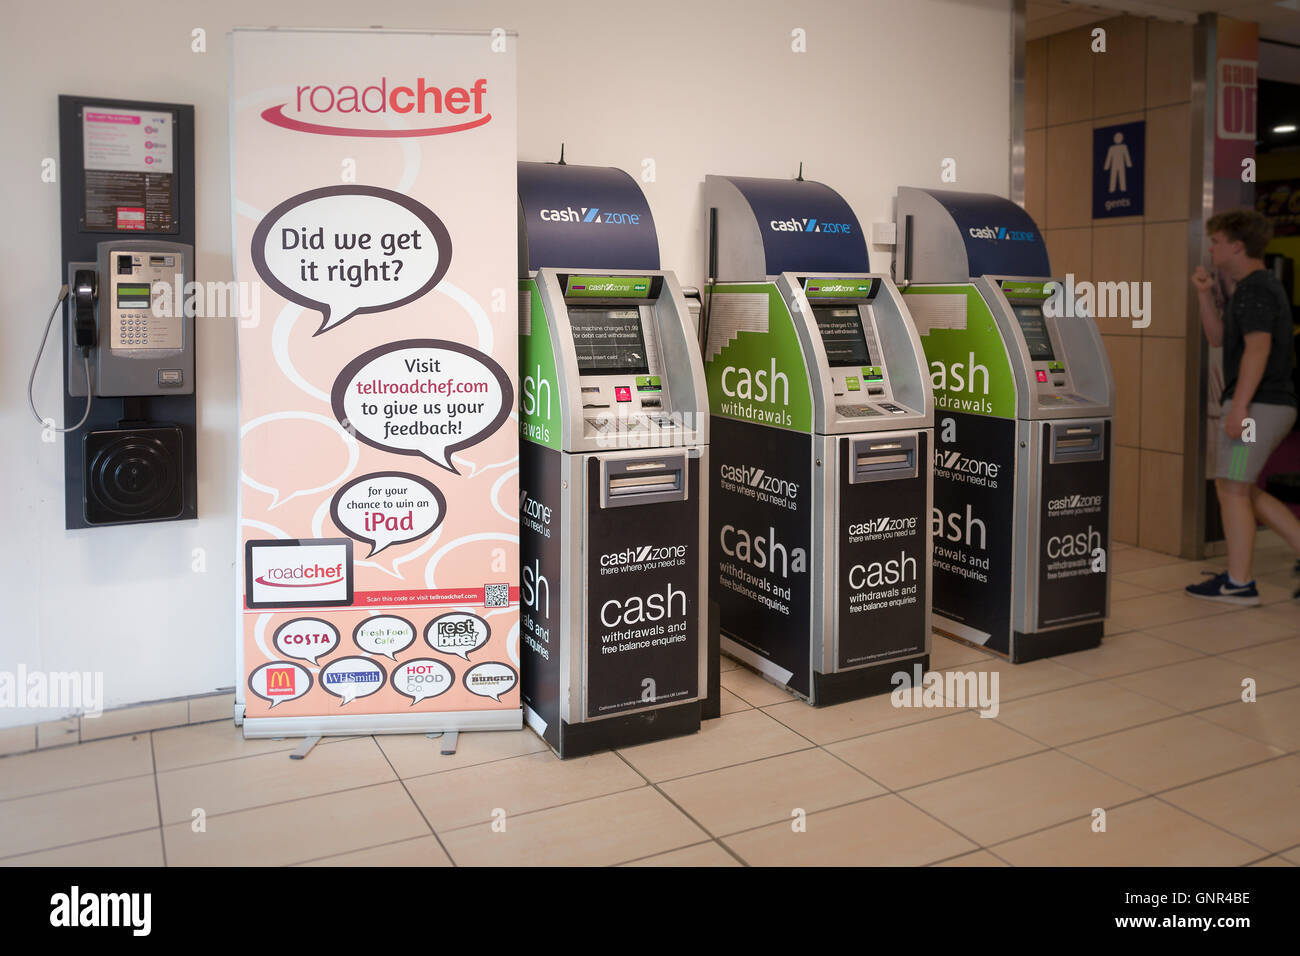 Inside a roadchef service station showing cash machines and a request for customer feedback to improve their services Stock Photo